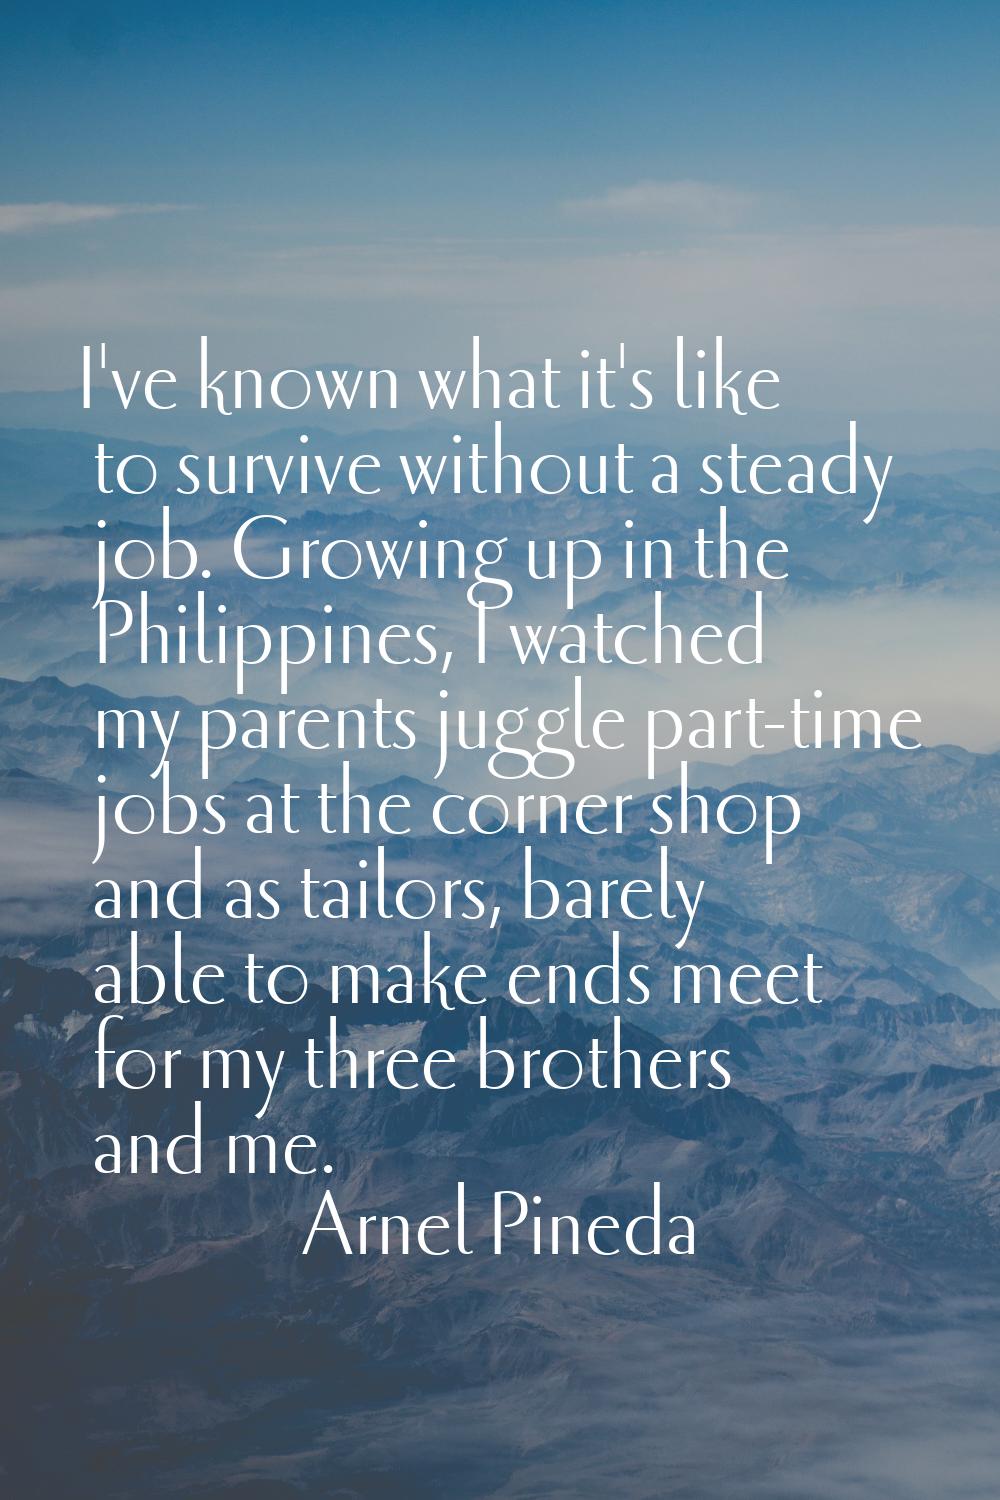 I've known what it's like to survive without a steady job. Growing up in the Philippines, I watched